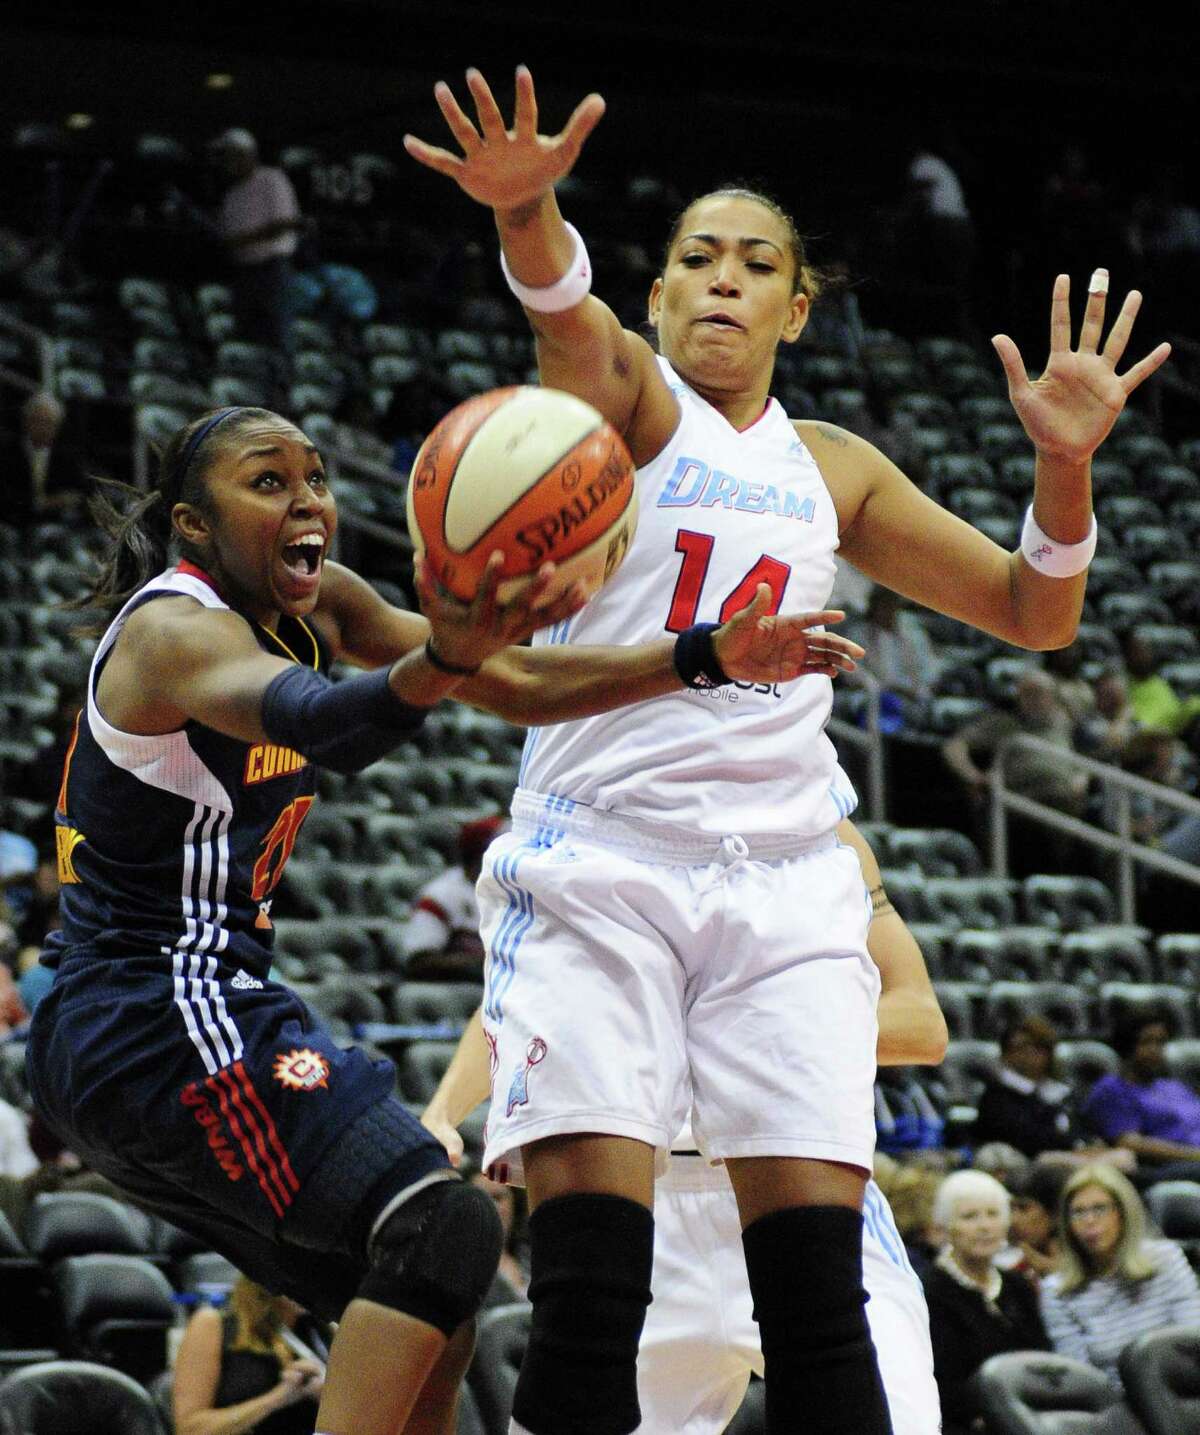 Connecticut guard Sun Renee Montgomery (21) goes up for a shot around the Dream’s Erika de Souza on Sept. 6, 2011 at Philips Arena in Atlanta.